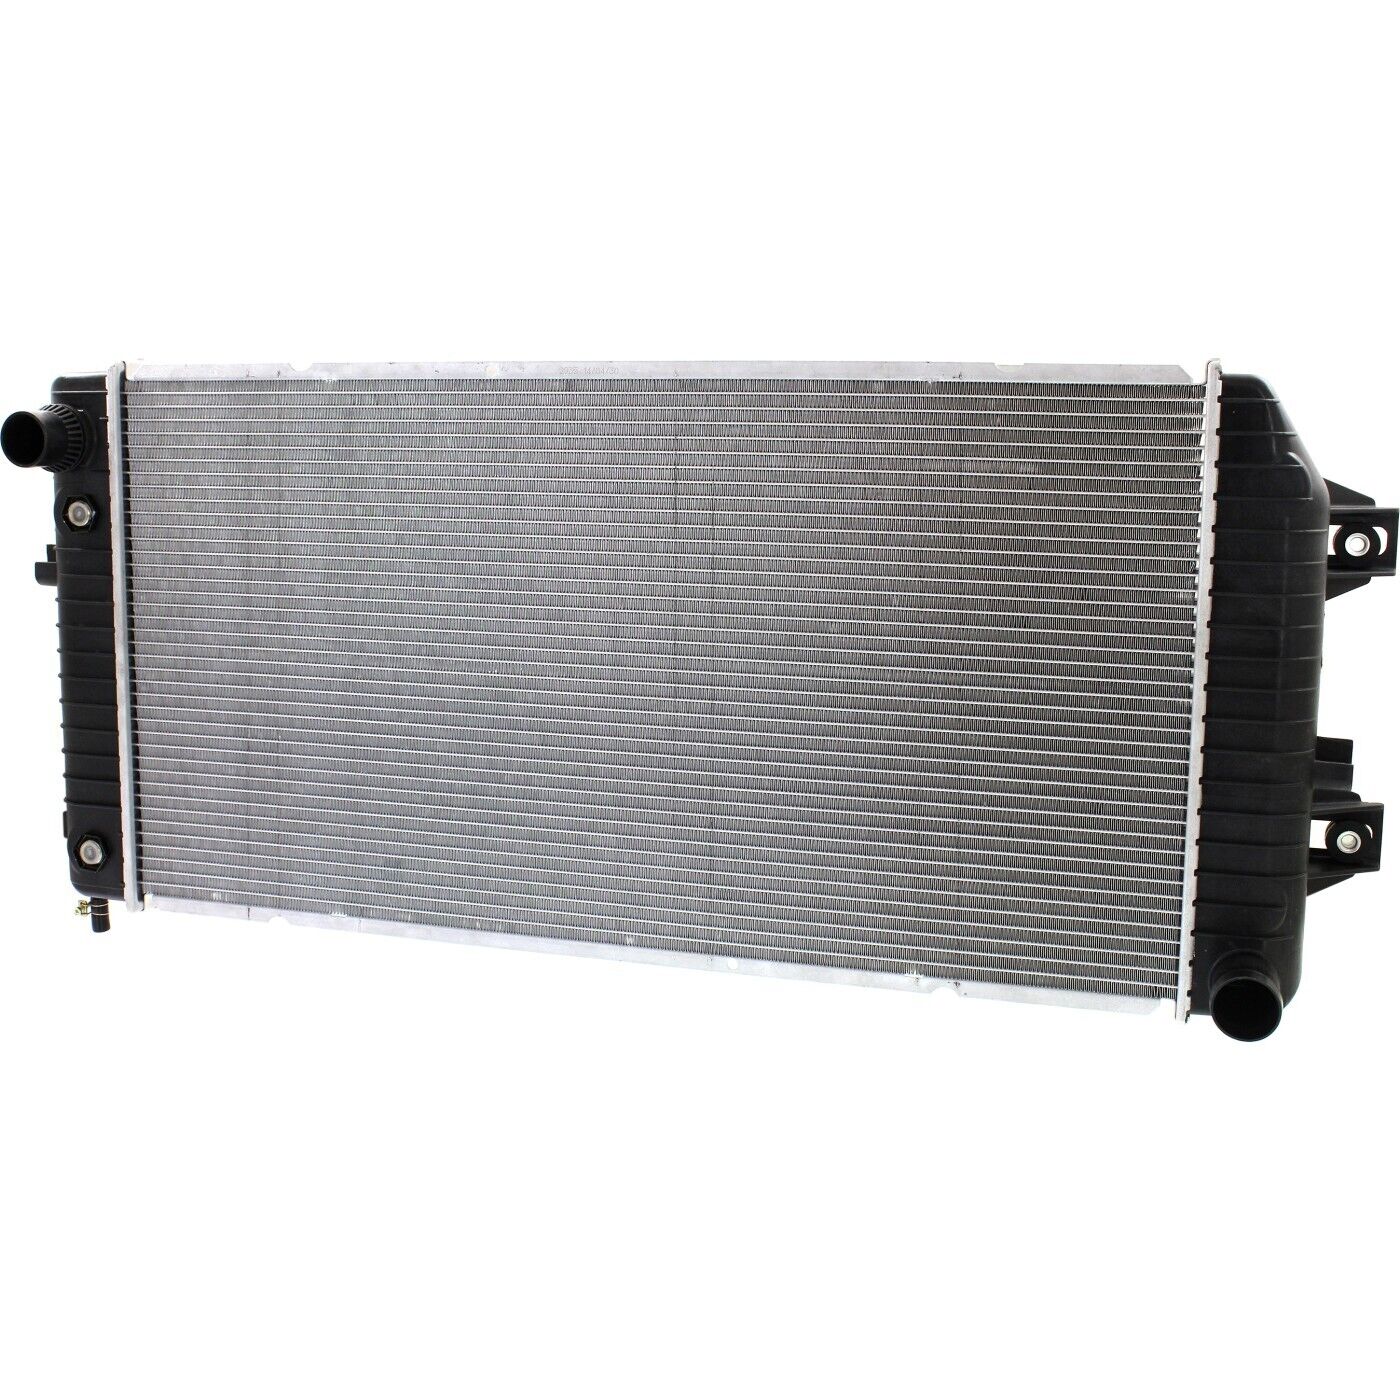 Radiator For 2006-14 Chevrolet Express 2500 Express 3500 6.6L 2 Rows Diesel